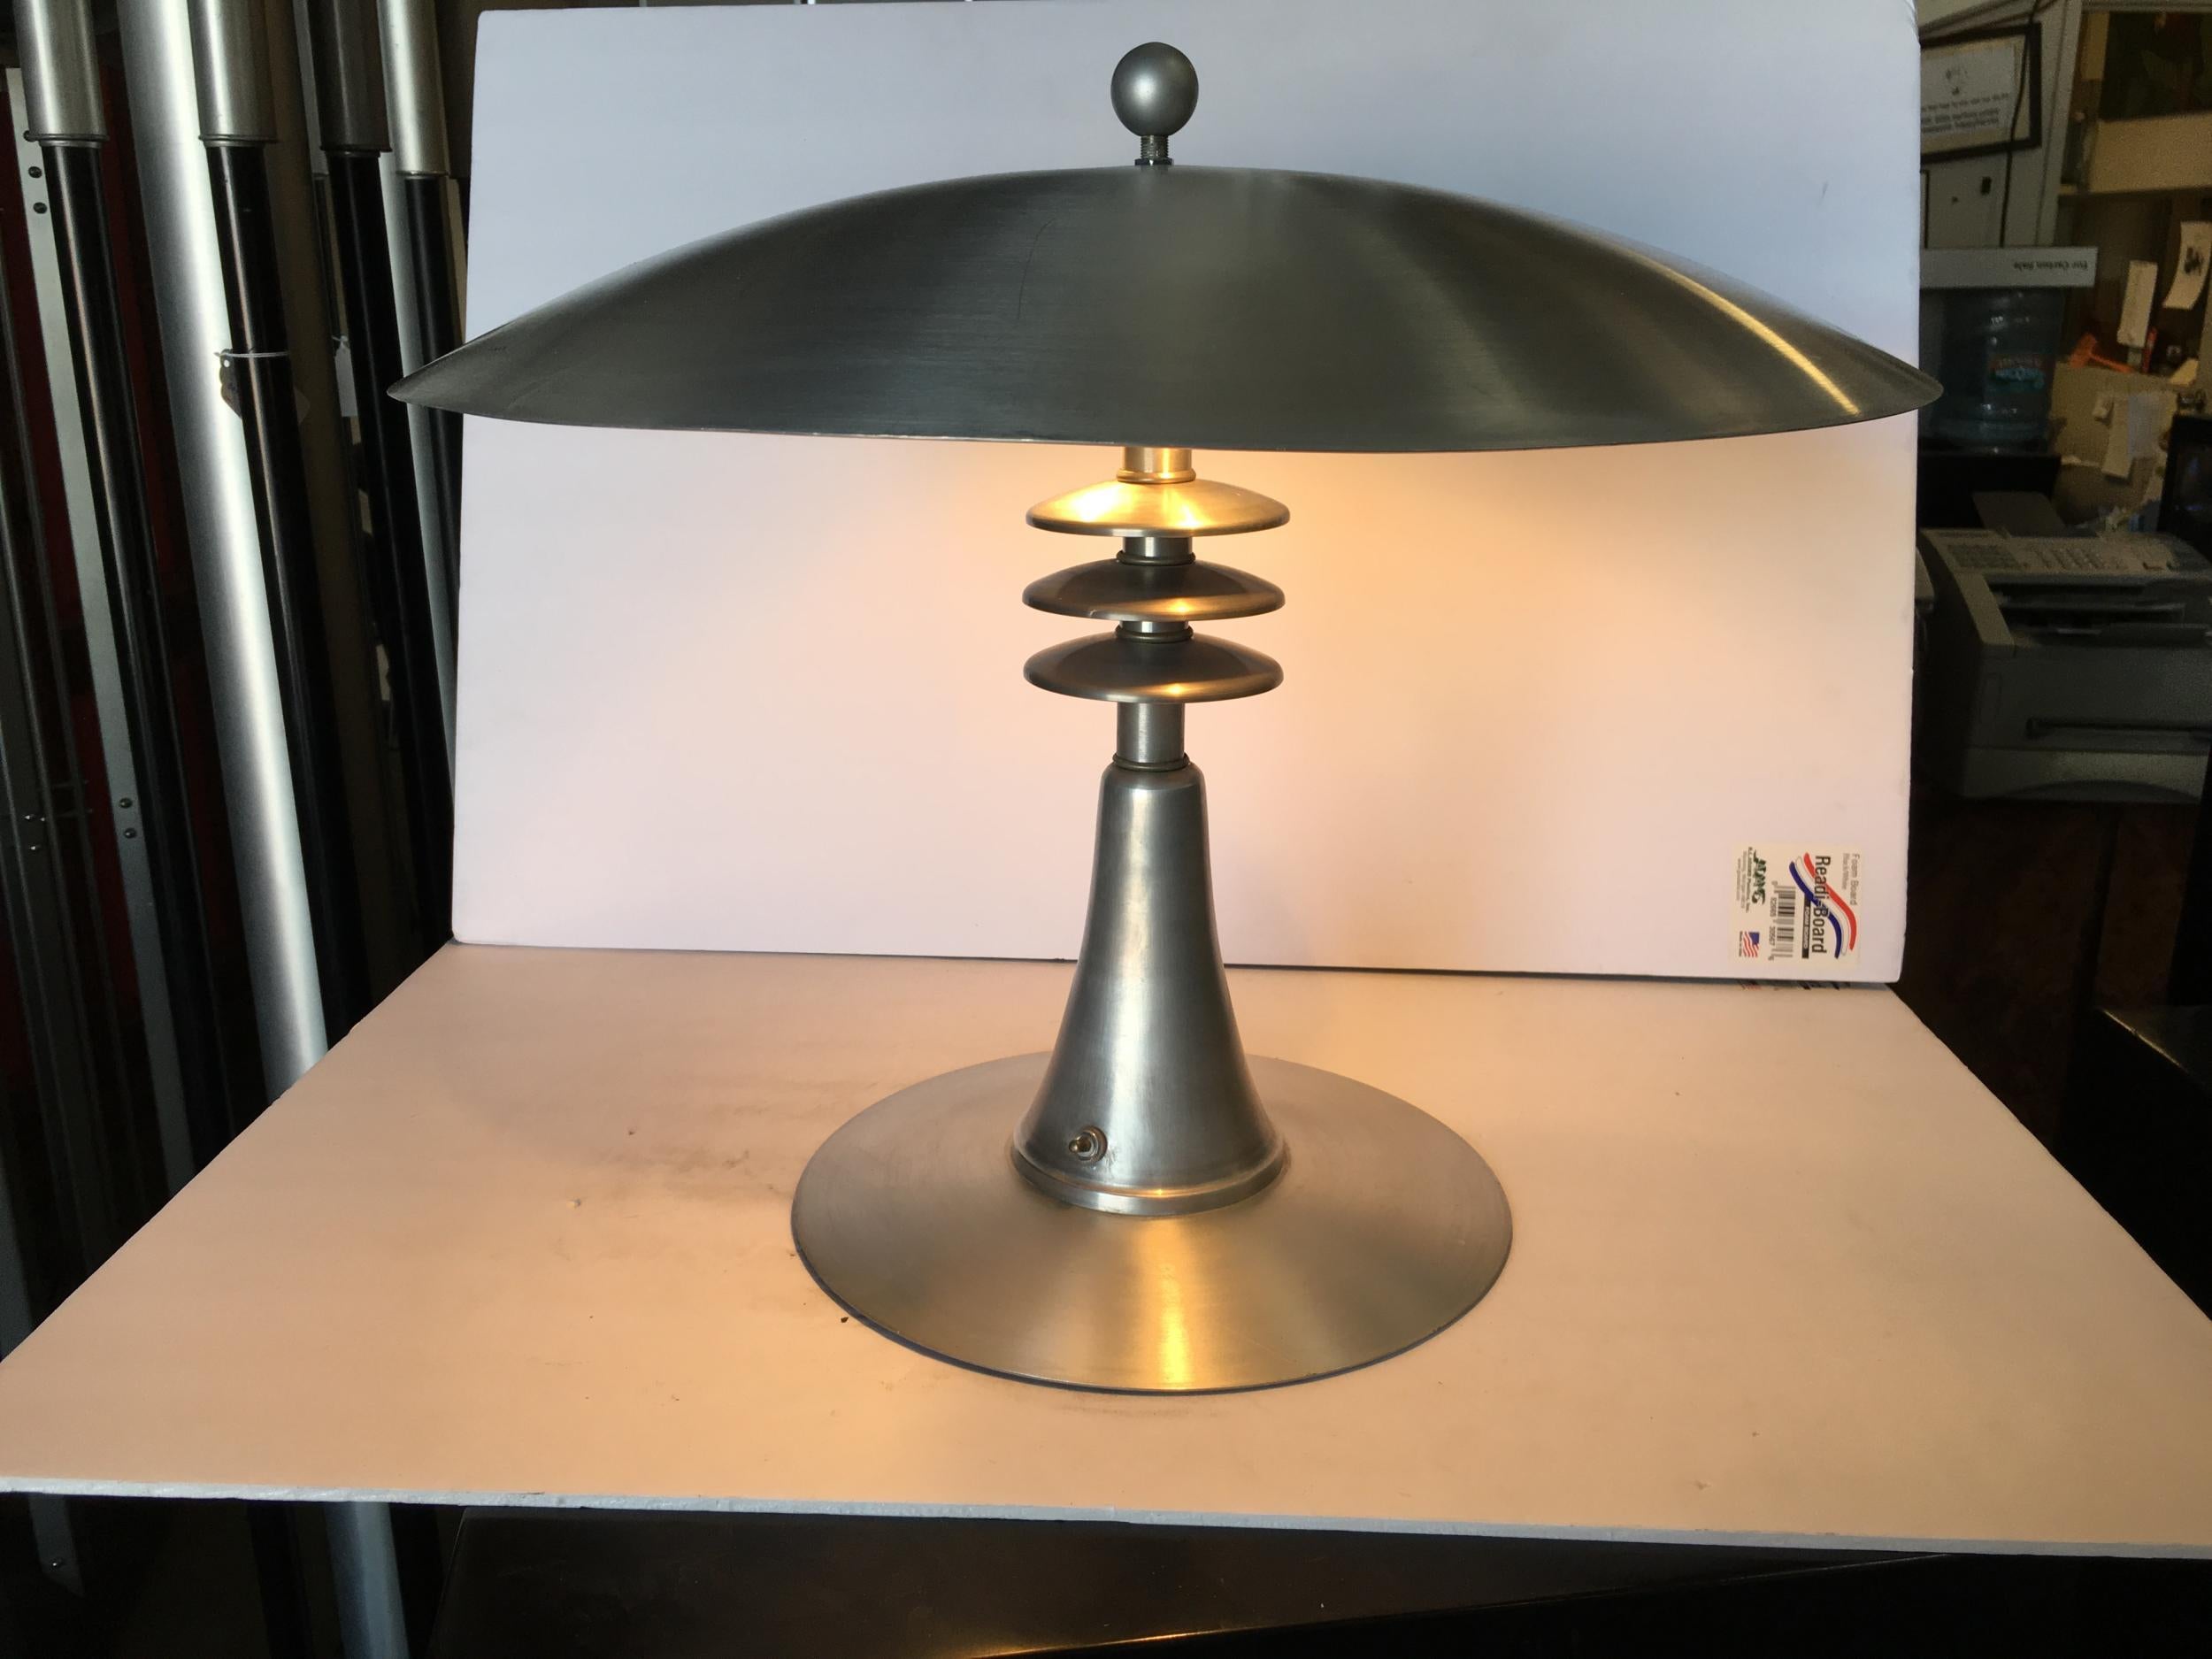 This stunning aluminum Art Deco style table lamp features a large 20